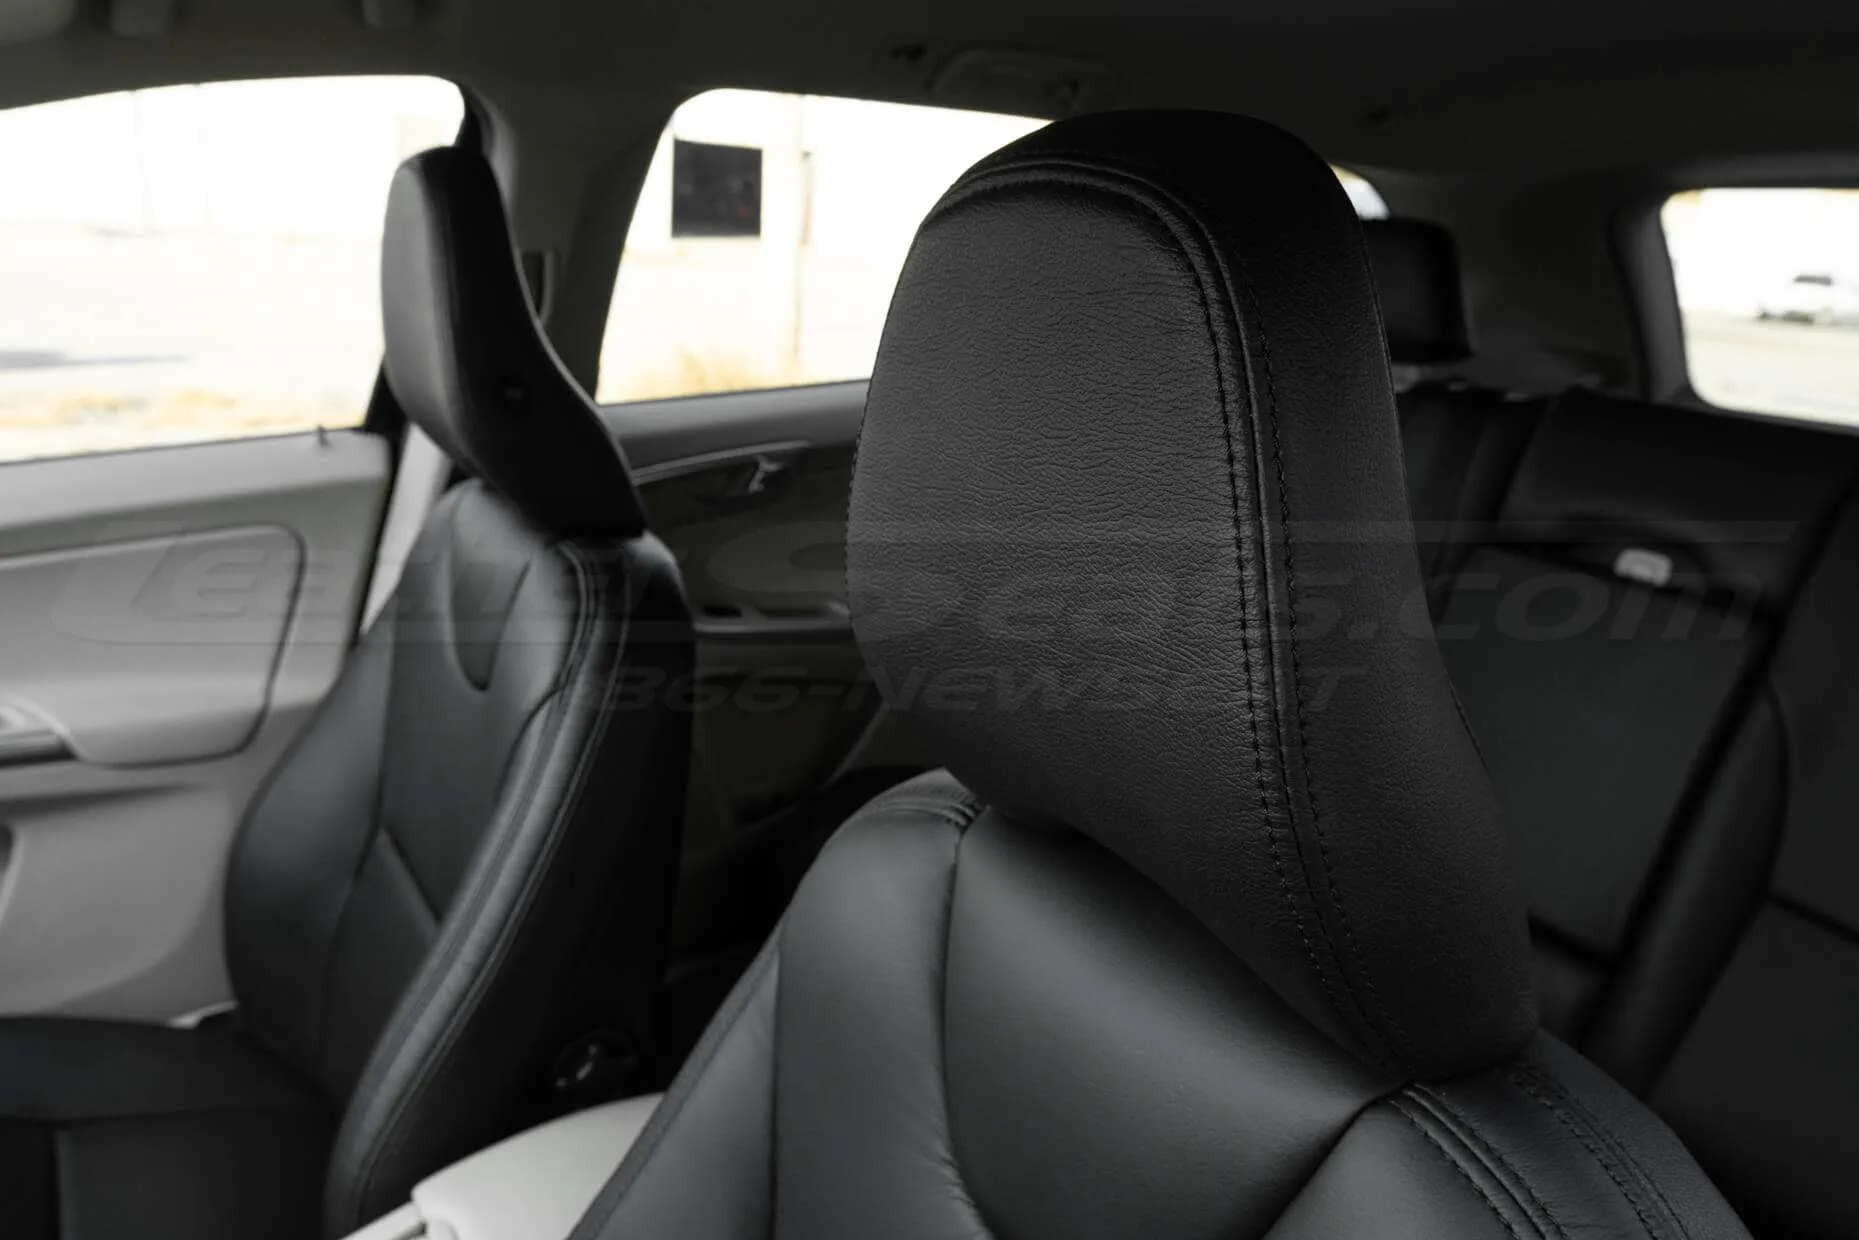 Leather headrest with matching black stitching